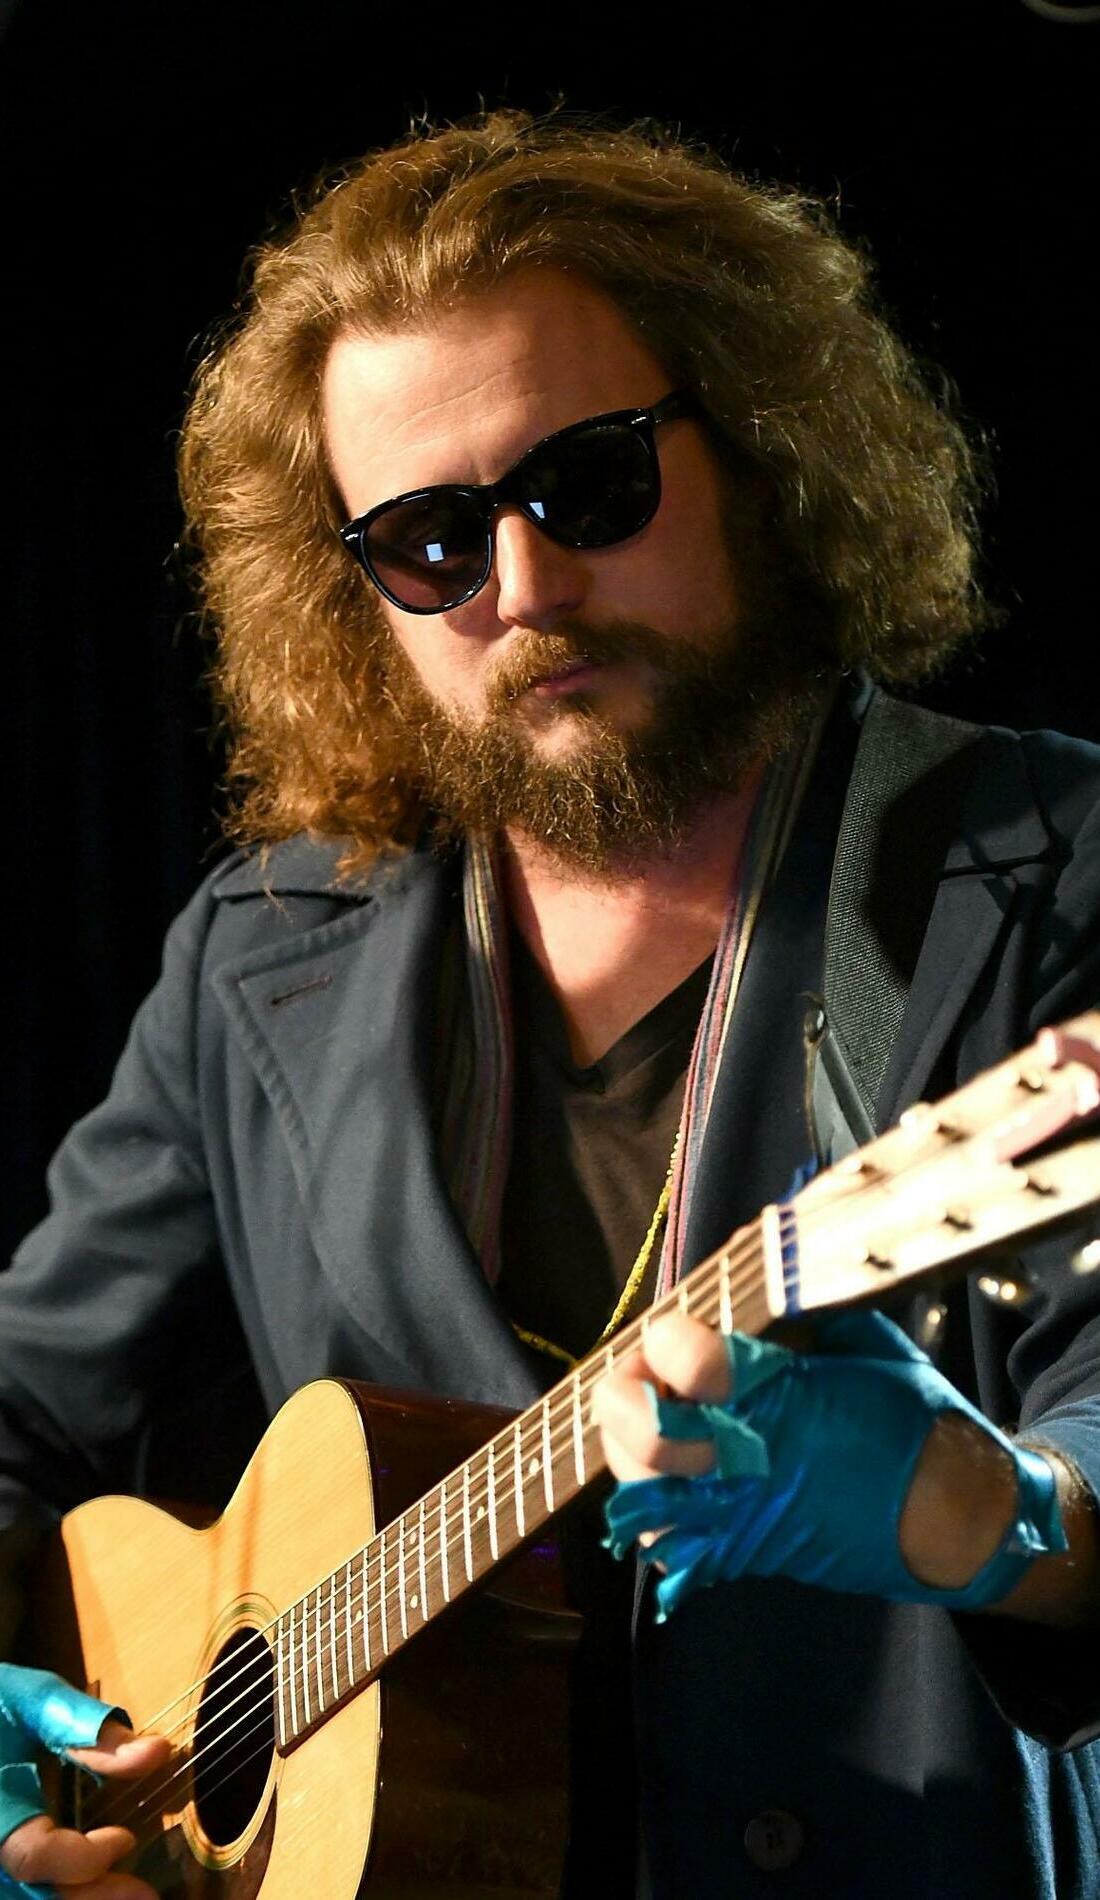 A My Morning Jacket live event